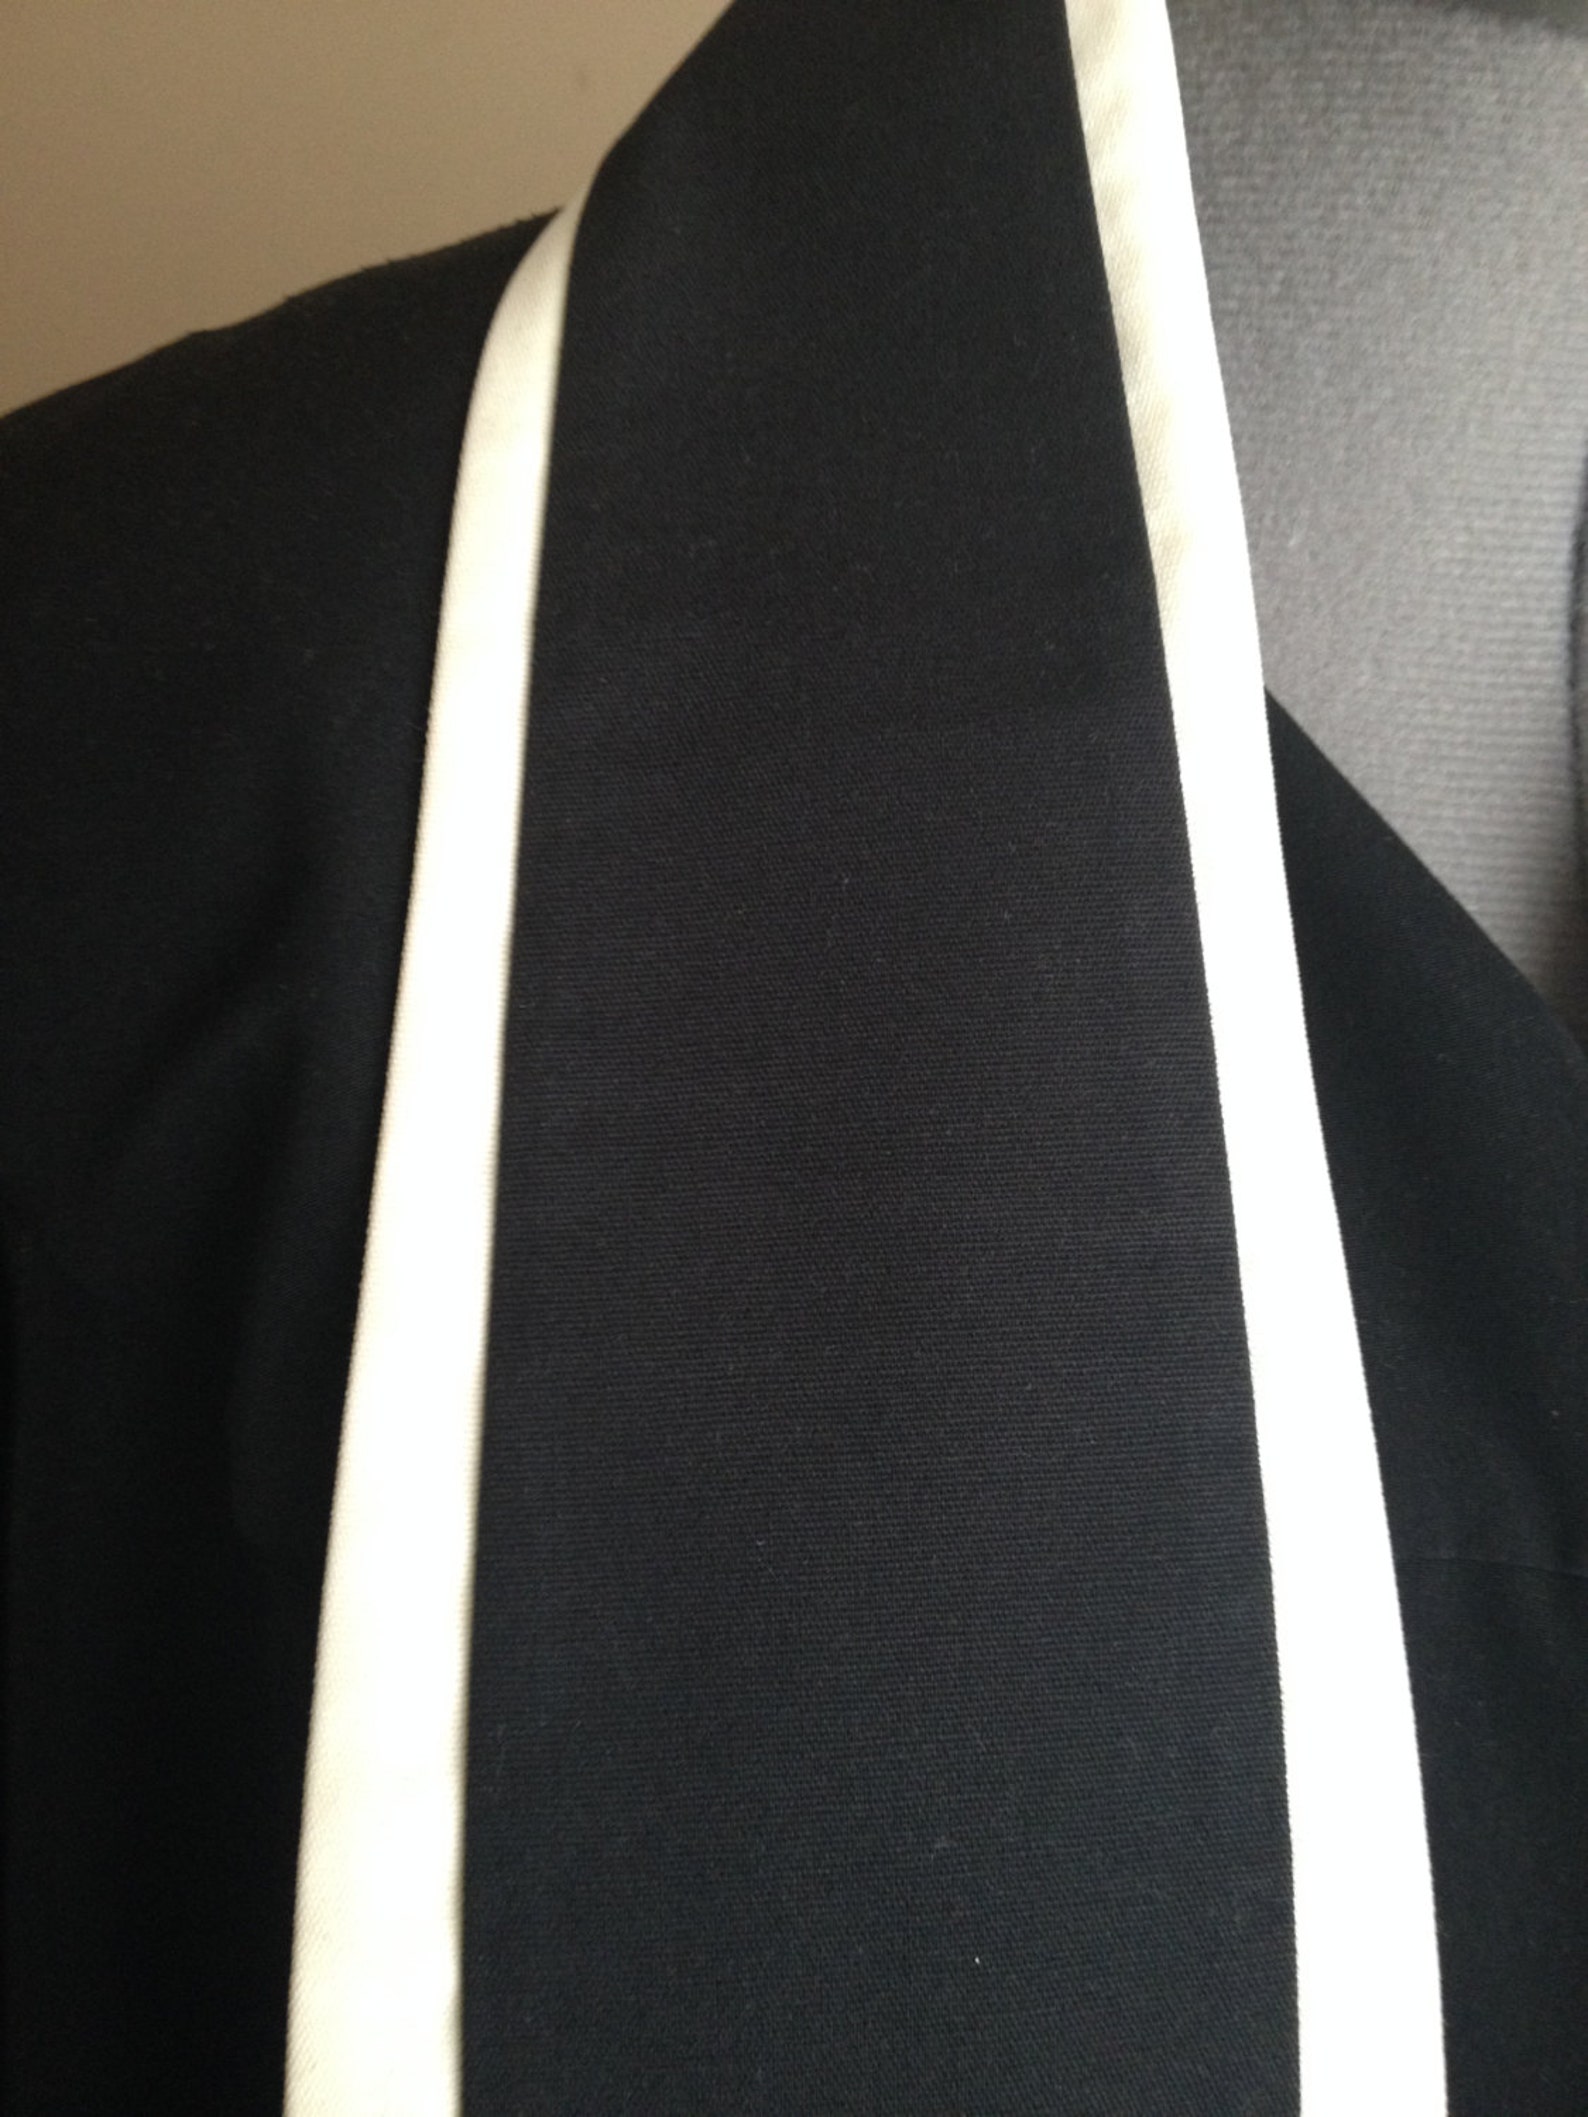 Black & White Wedding or Funeral Officiant Clergy Stole | Etsy